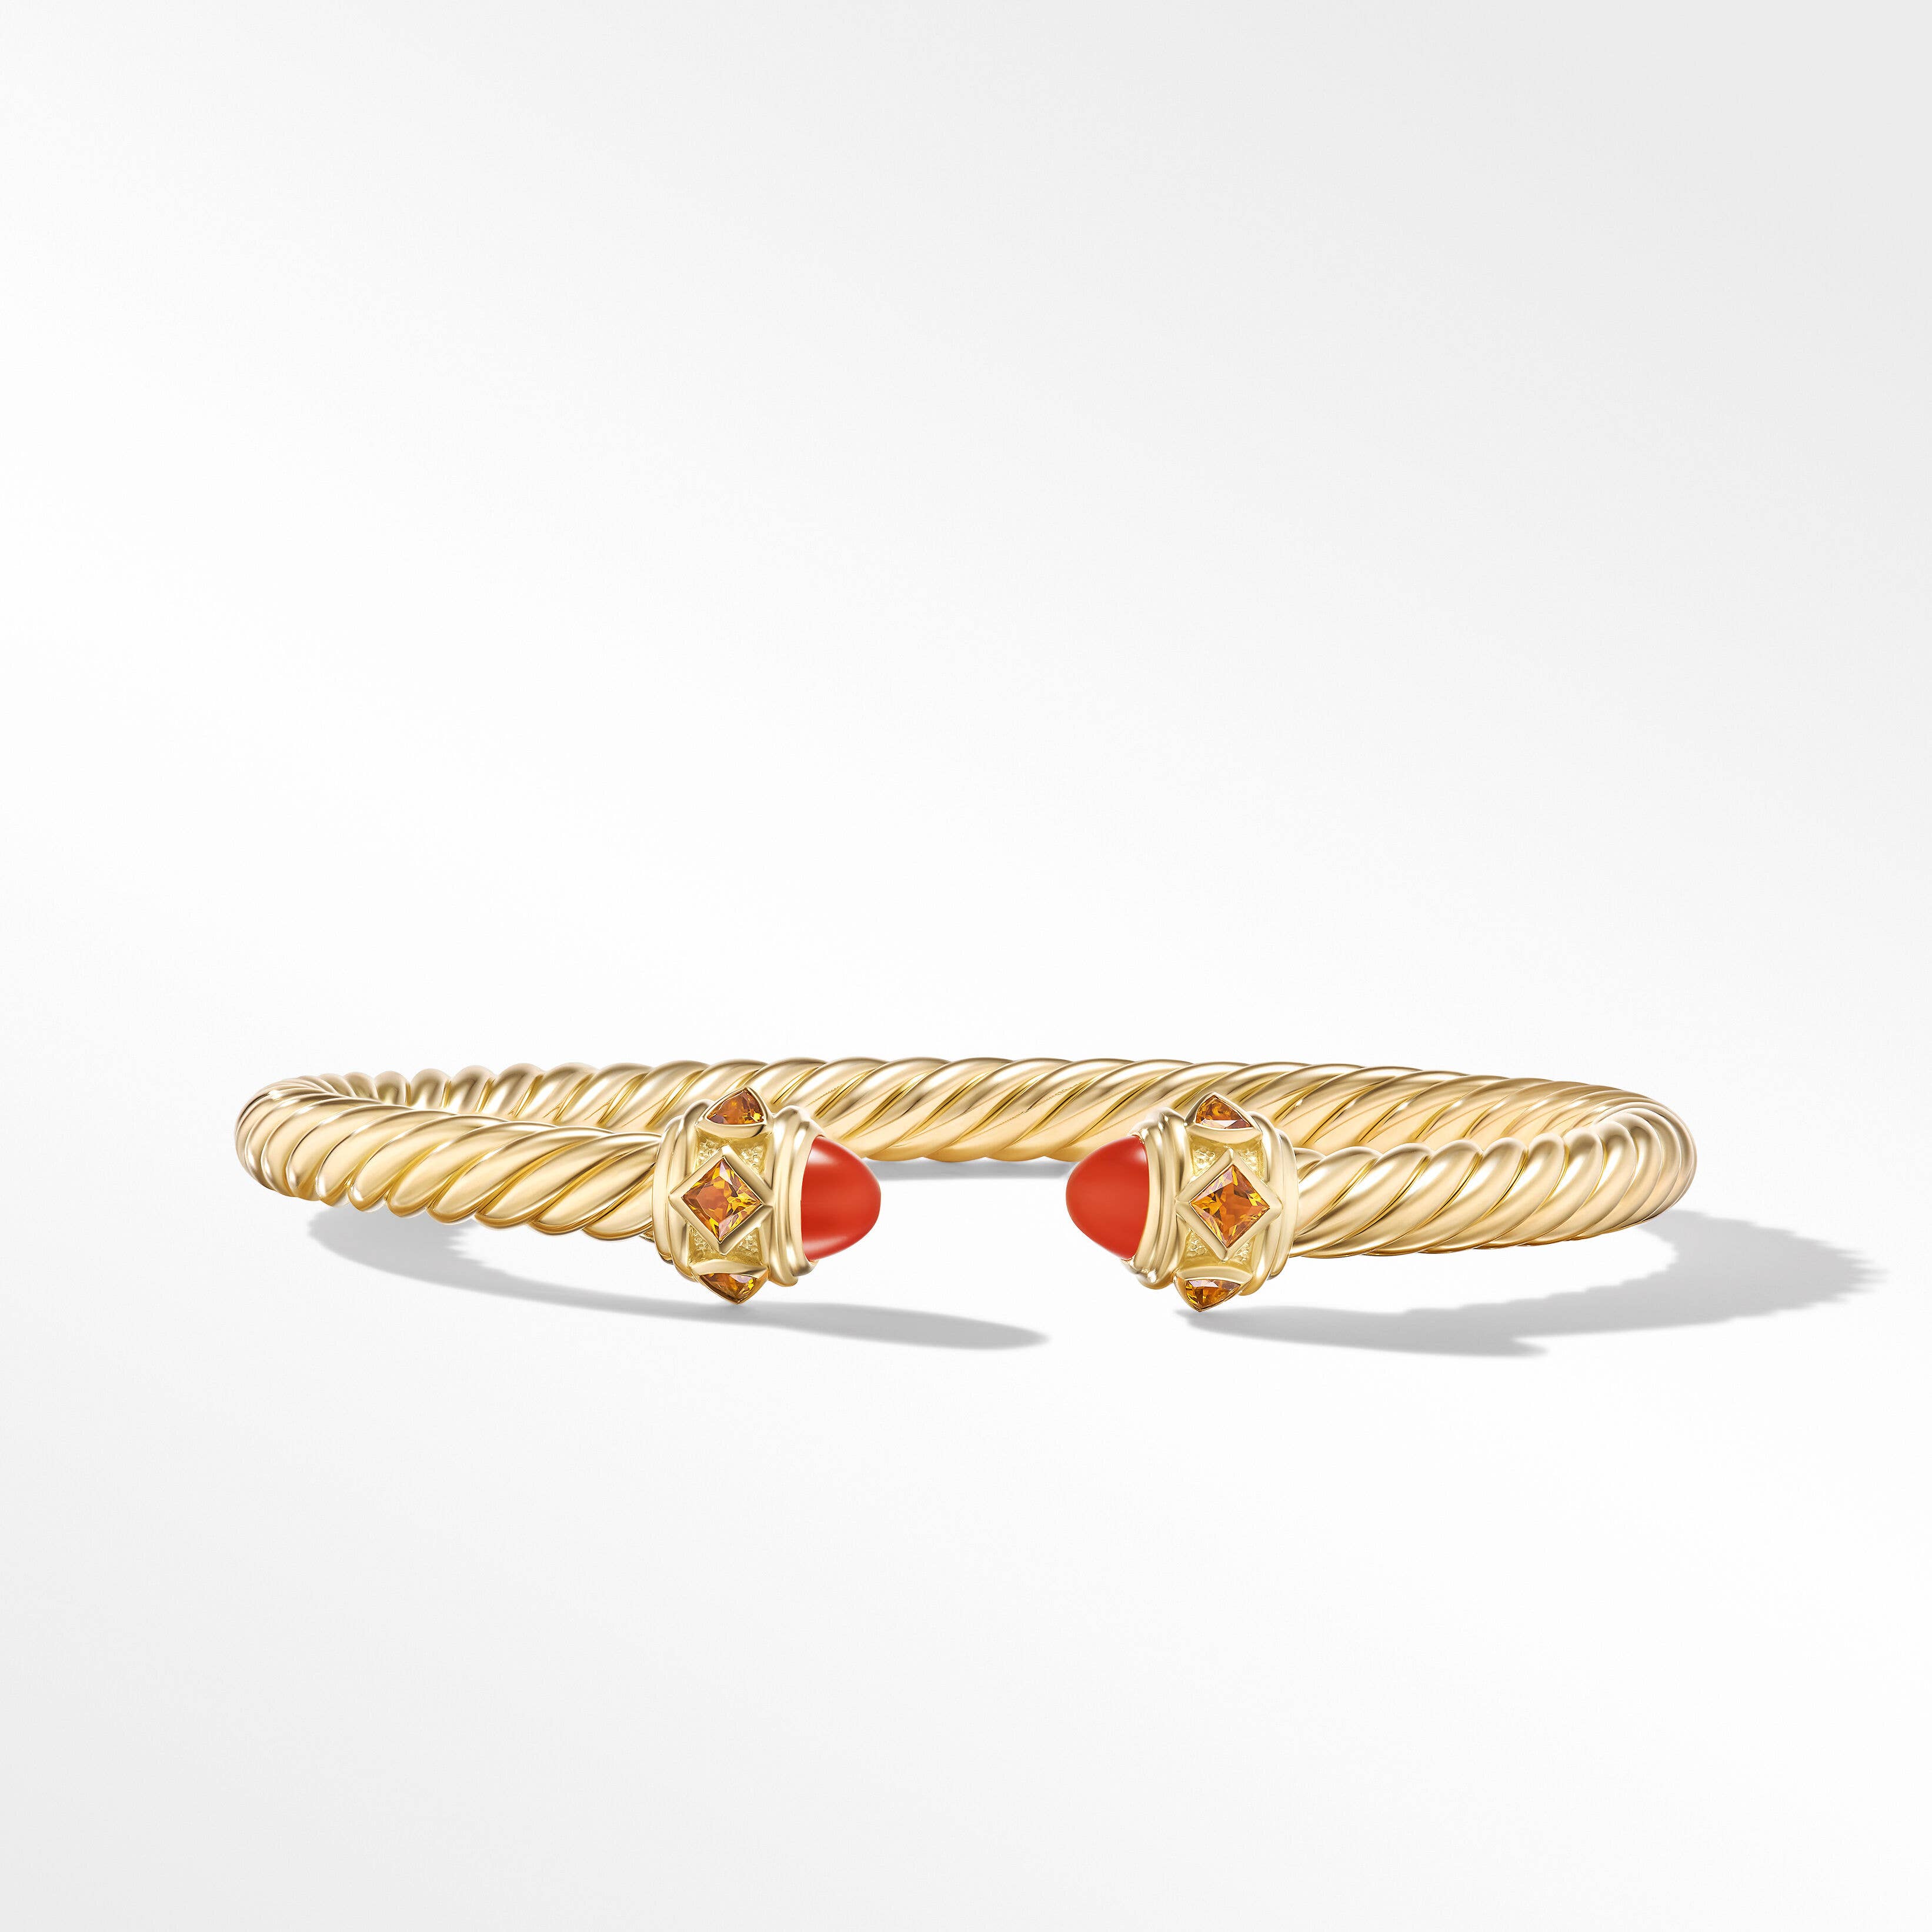 Renaissance® Bracelet in 18K Yellow Gold with Carnelian and Citrine